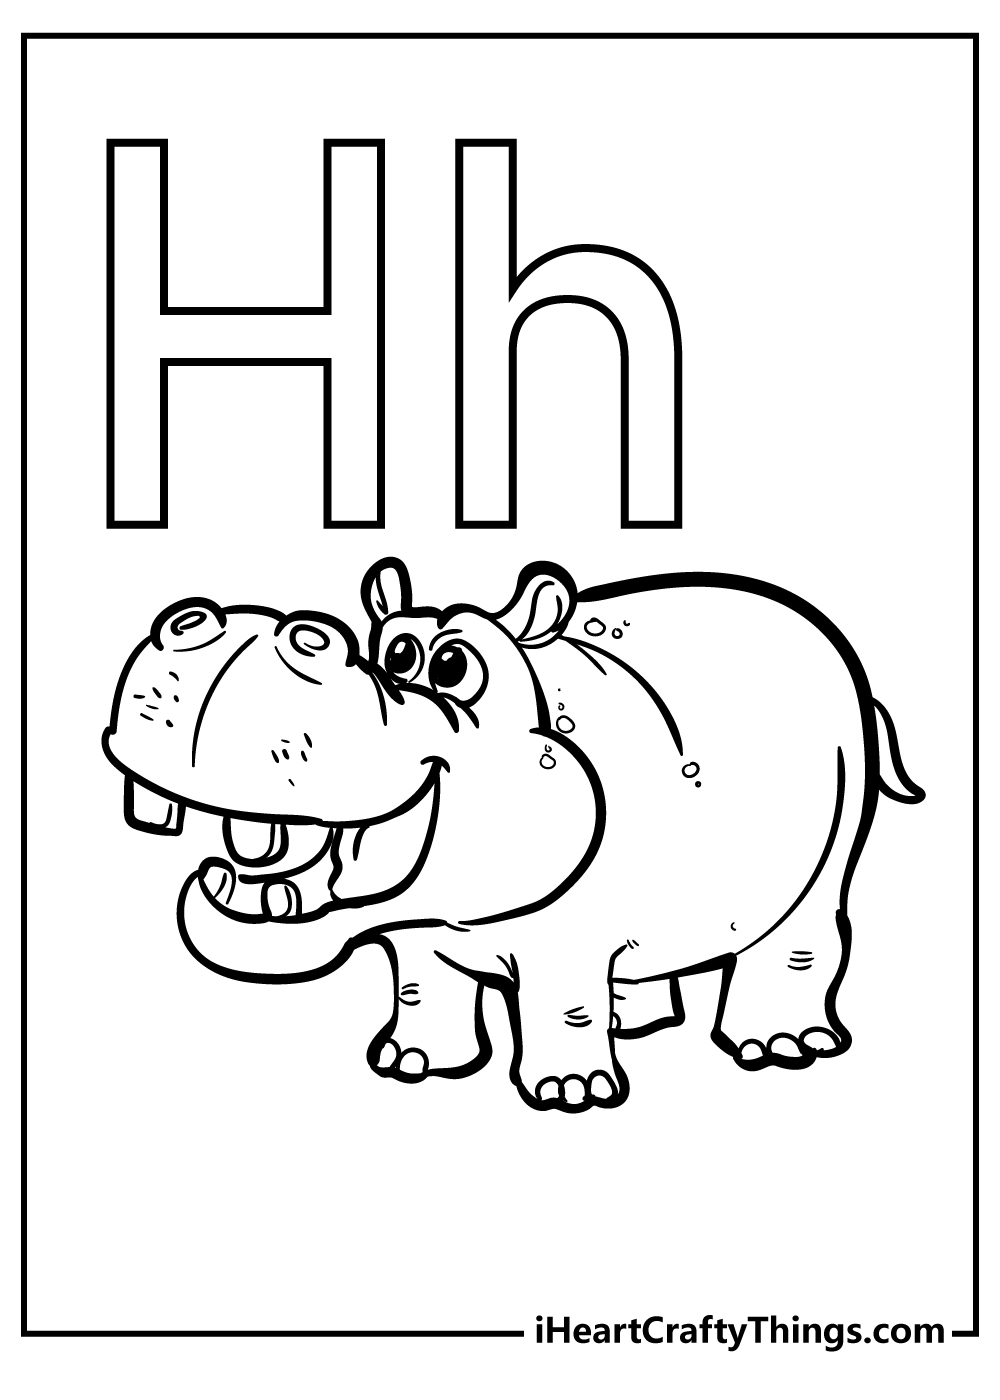 Letter H Coloring Pages free pdf download